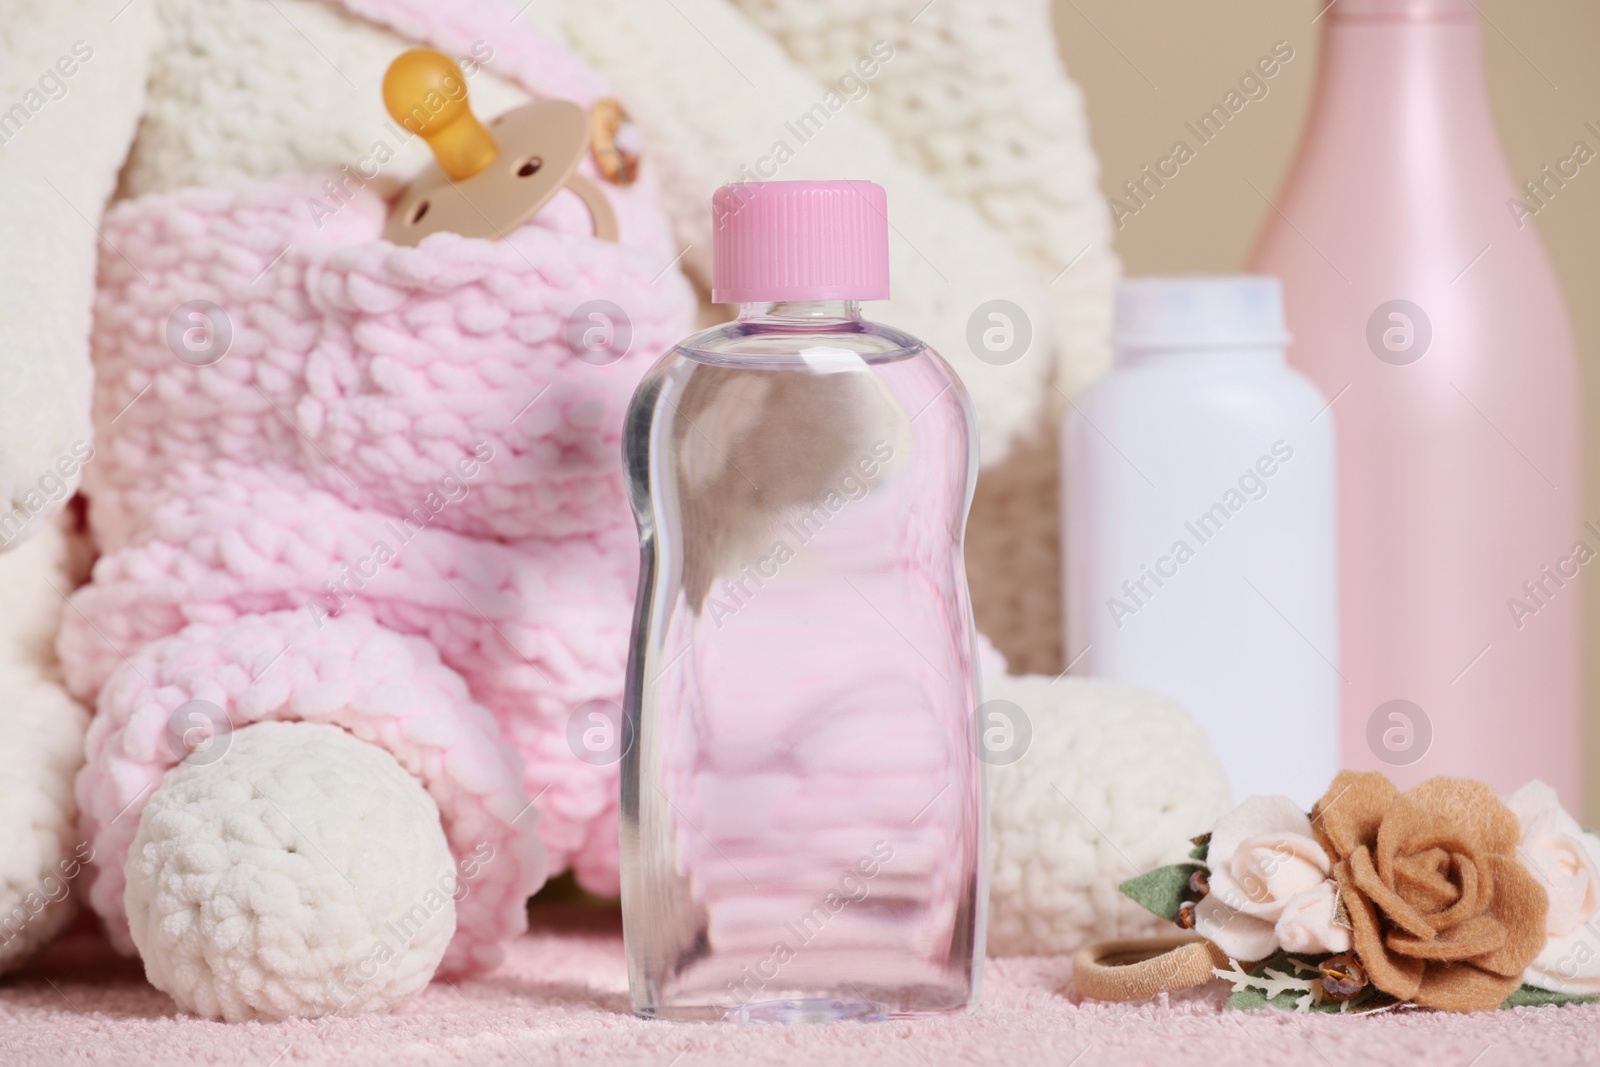 Photo of Baby cosmetic products and accessories on pink towel